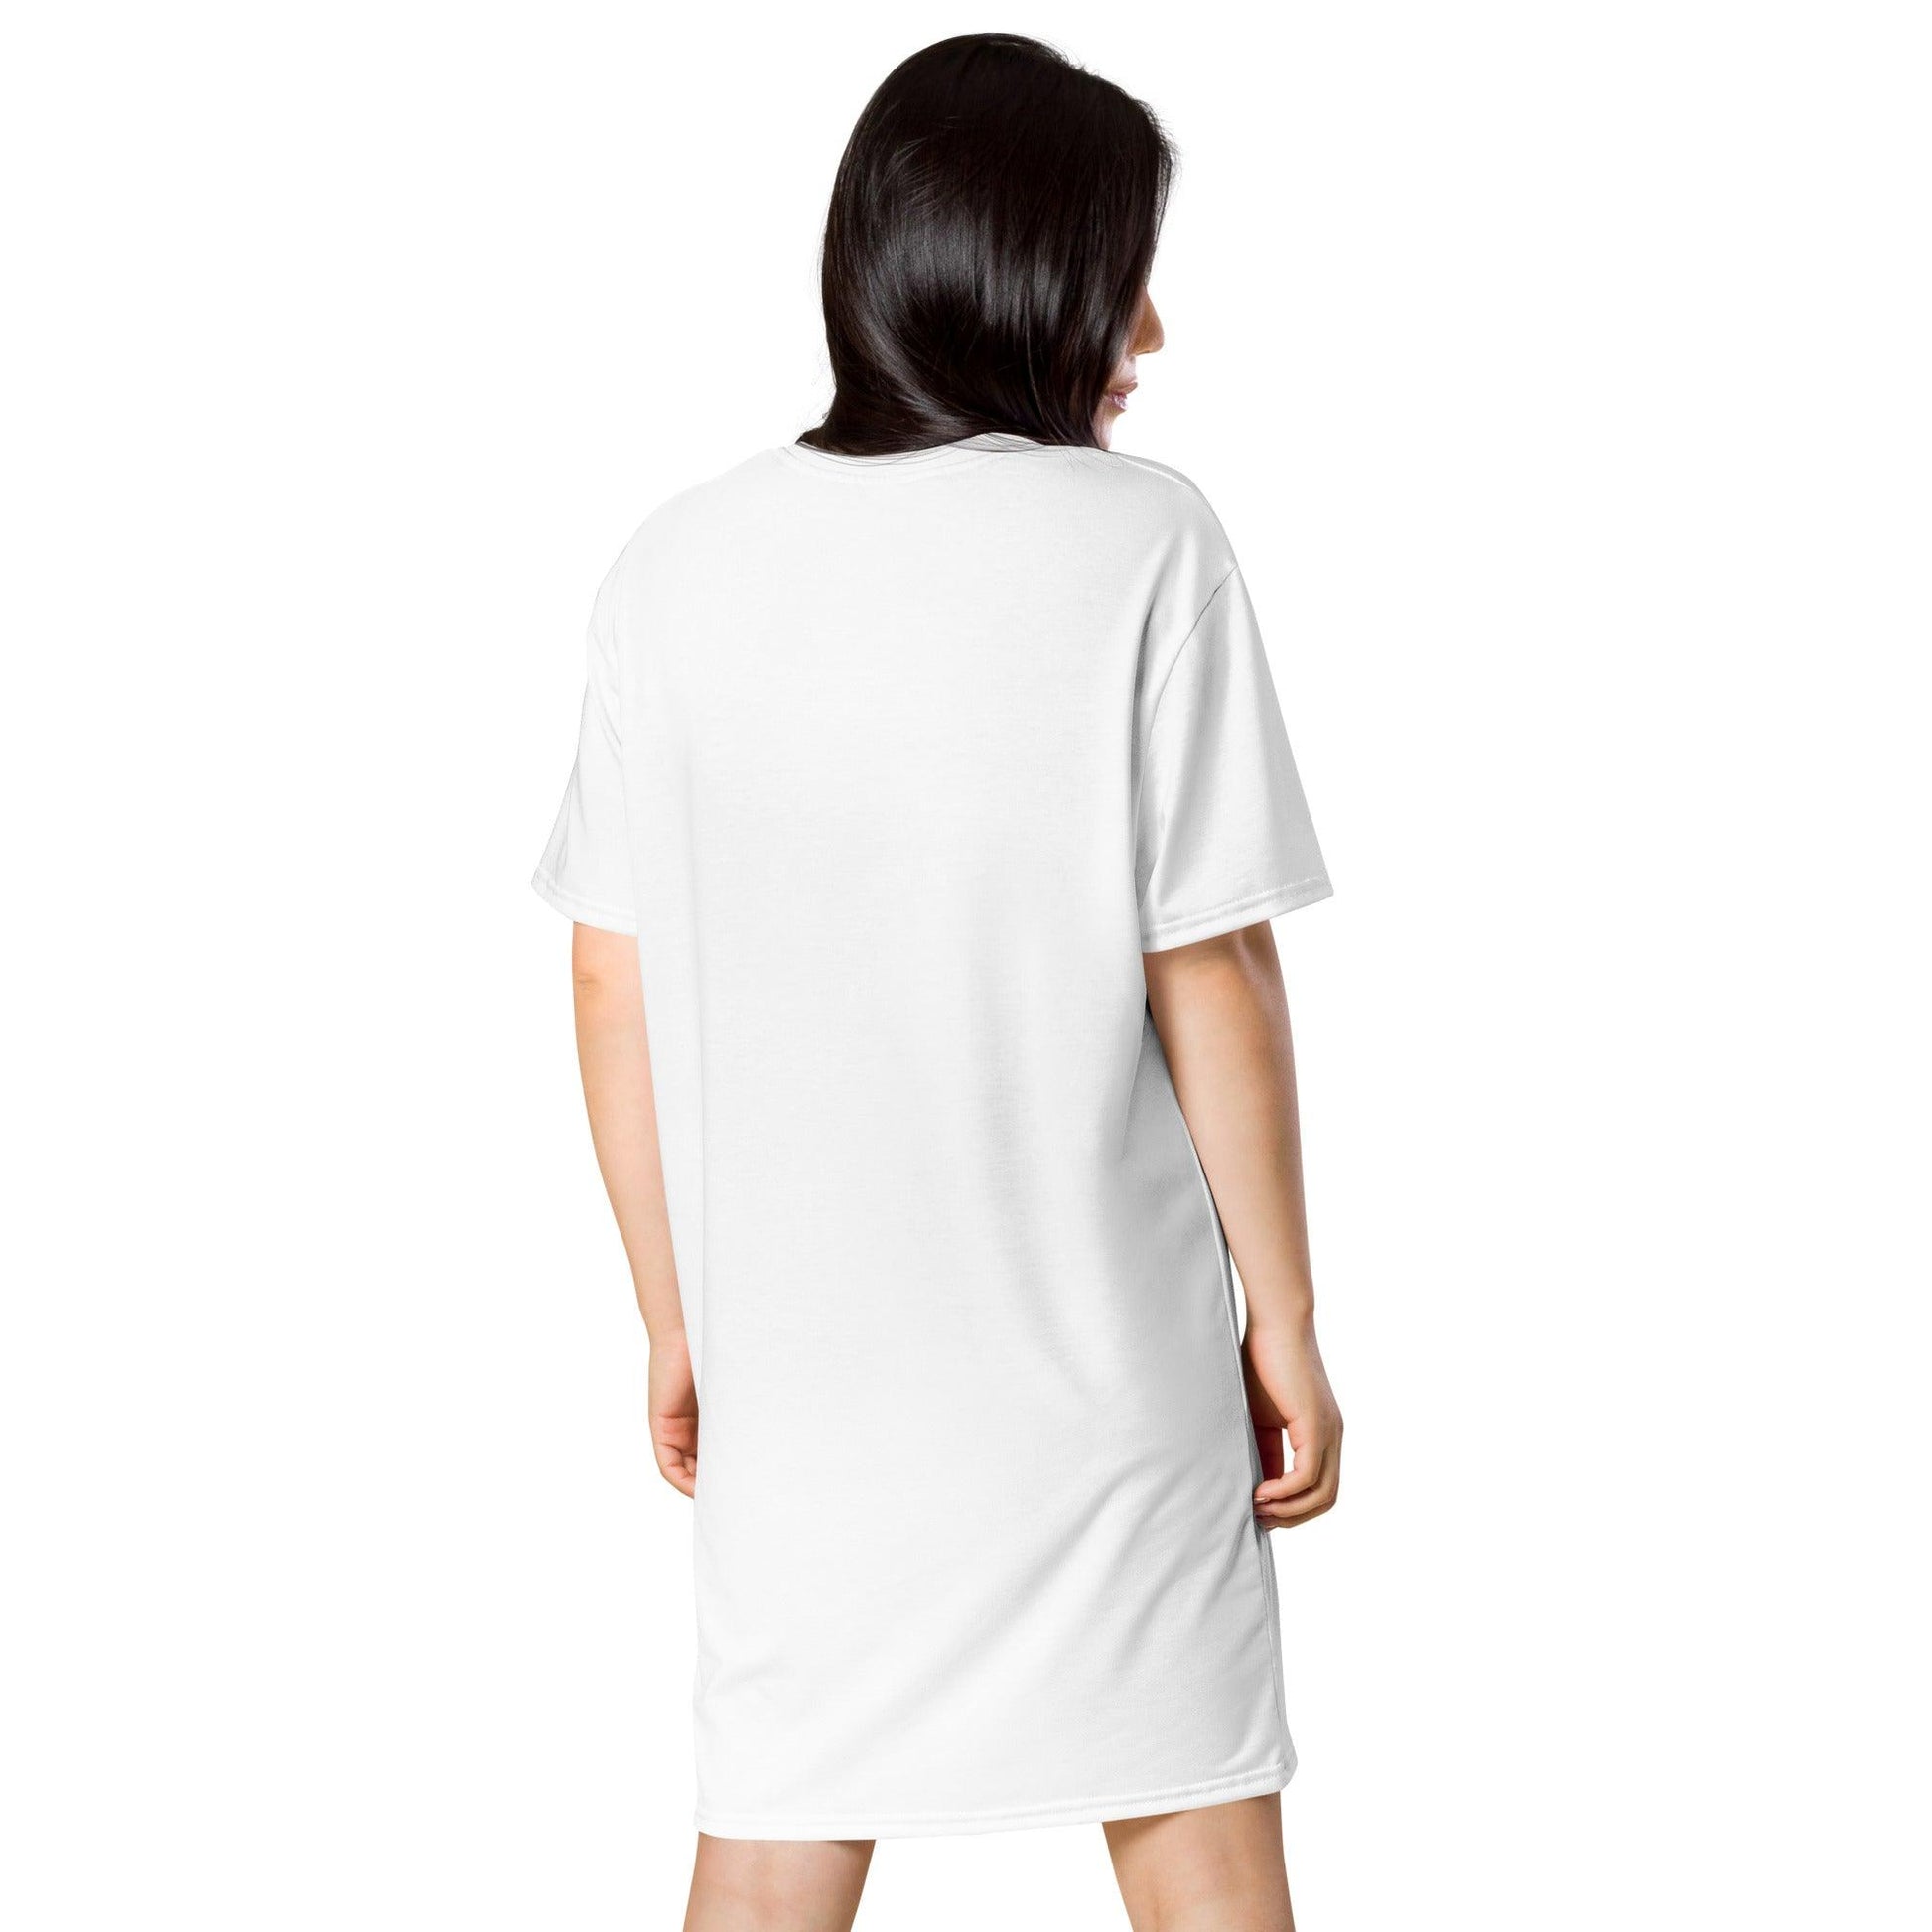 You’re The Wine That I Want - Womens White T-Shirt Dress - iSAW Company